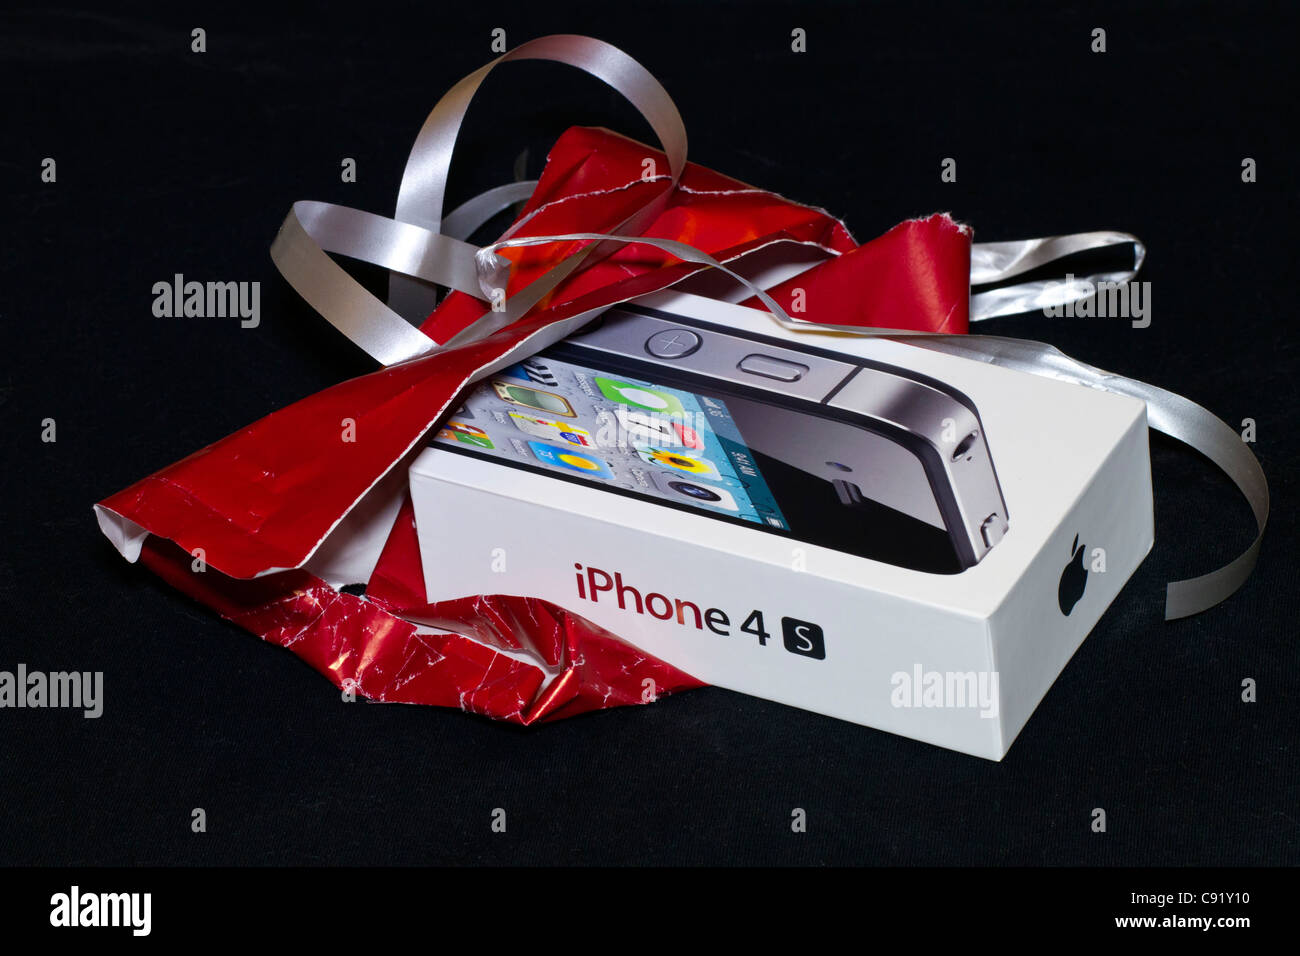 The iPhone 4S in its case, just opened from being gift-wrapped. Stock Photo